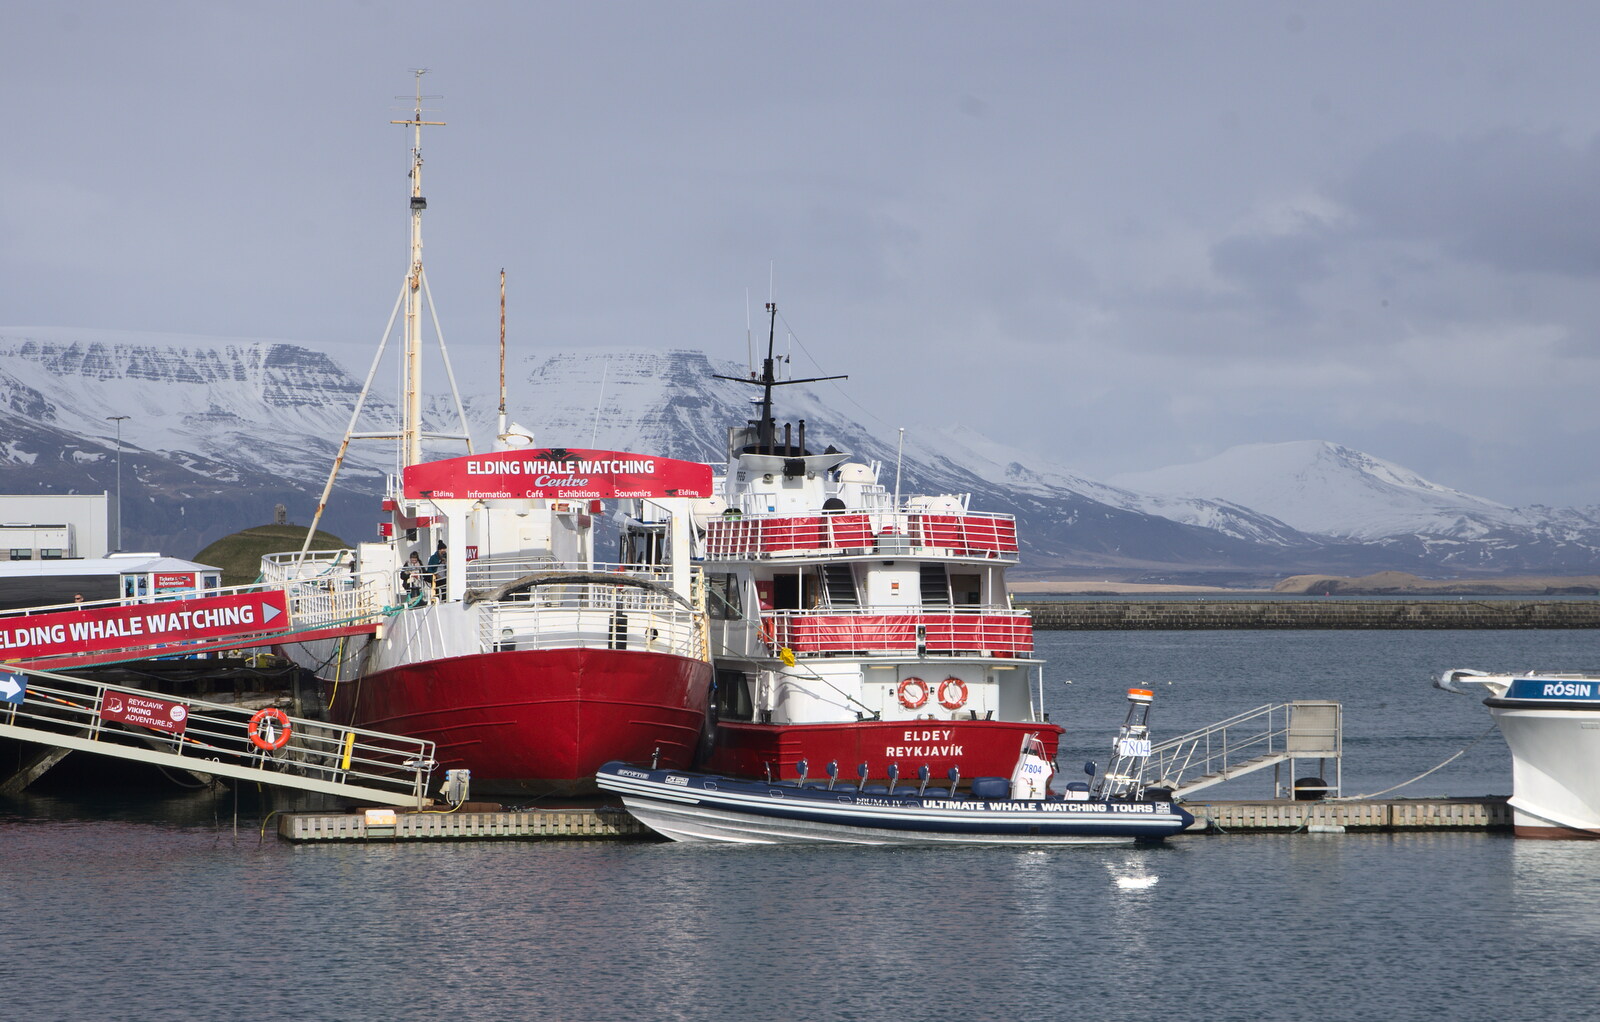 Our whale-watching boat: Eldey from Hallgrímskirkja Cathedral and Whale Watching, Reykjavik - 21st April 2017